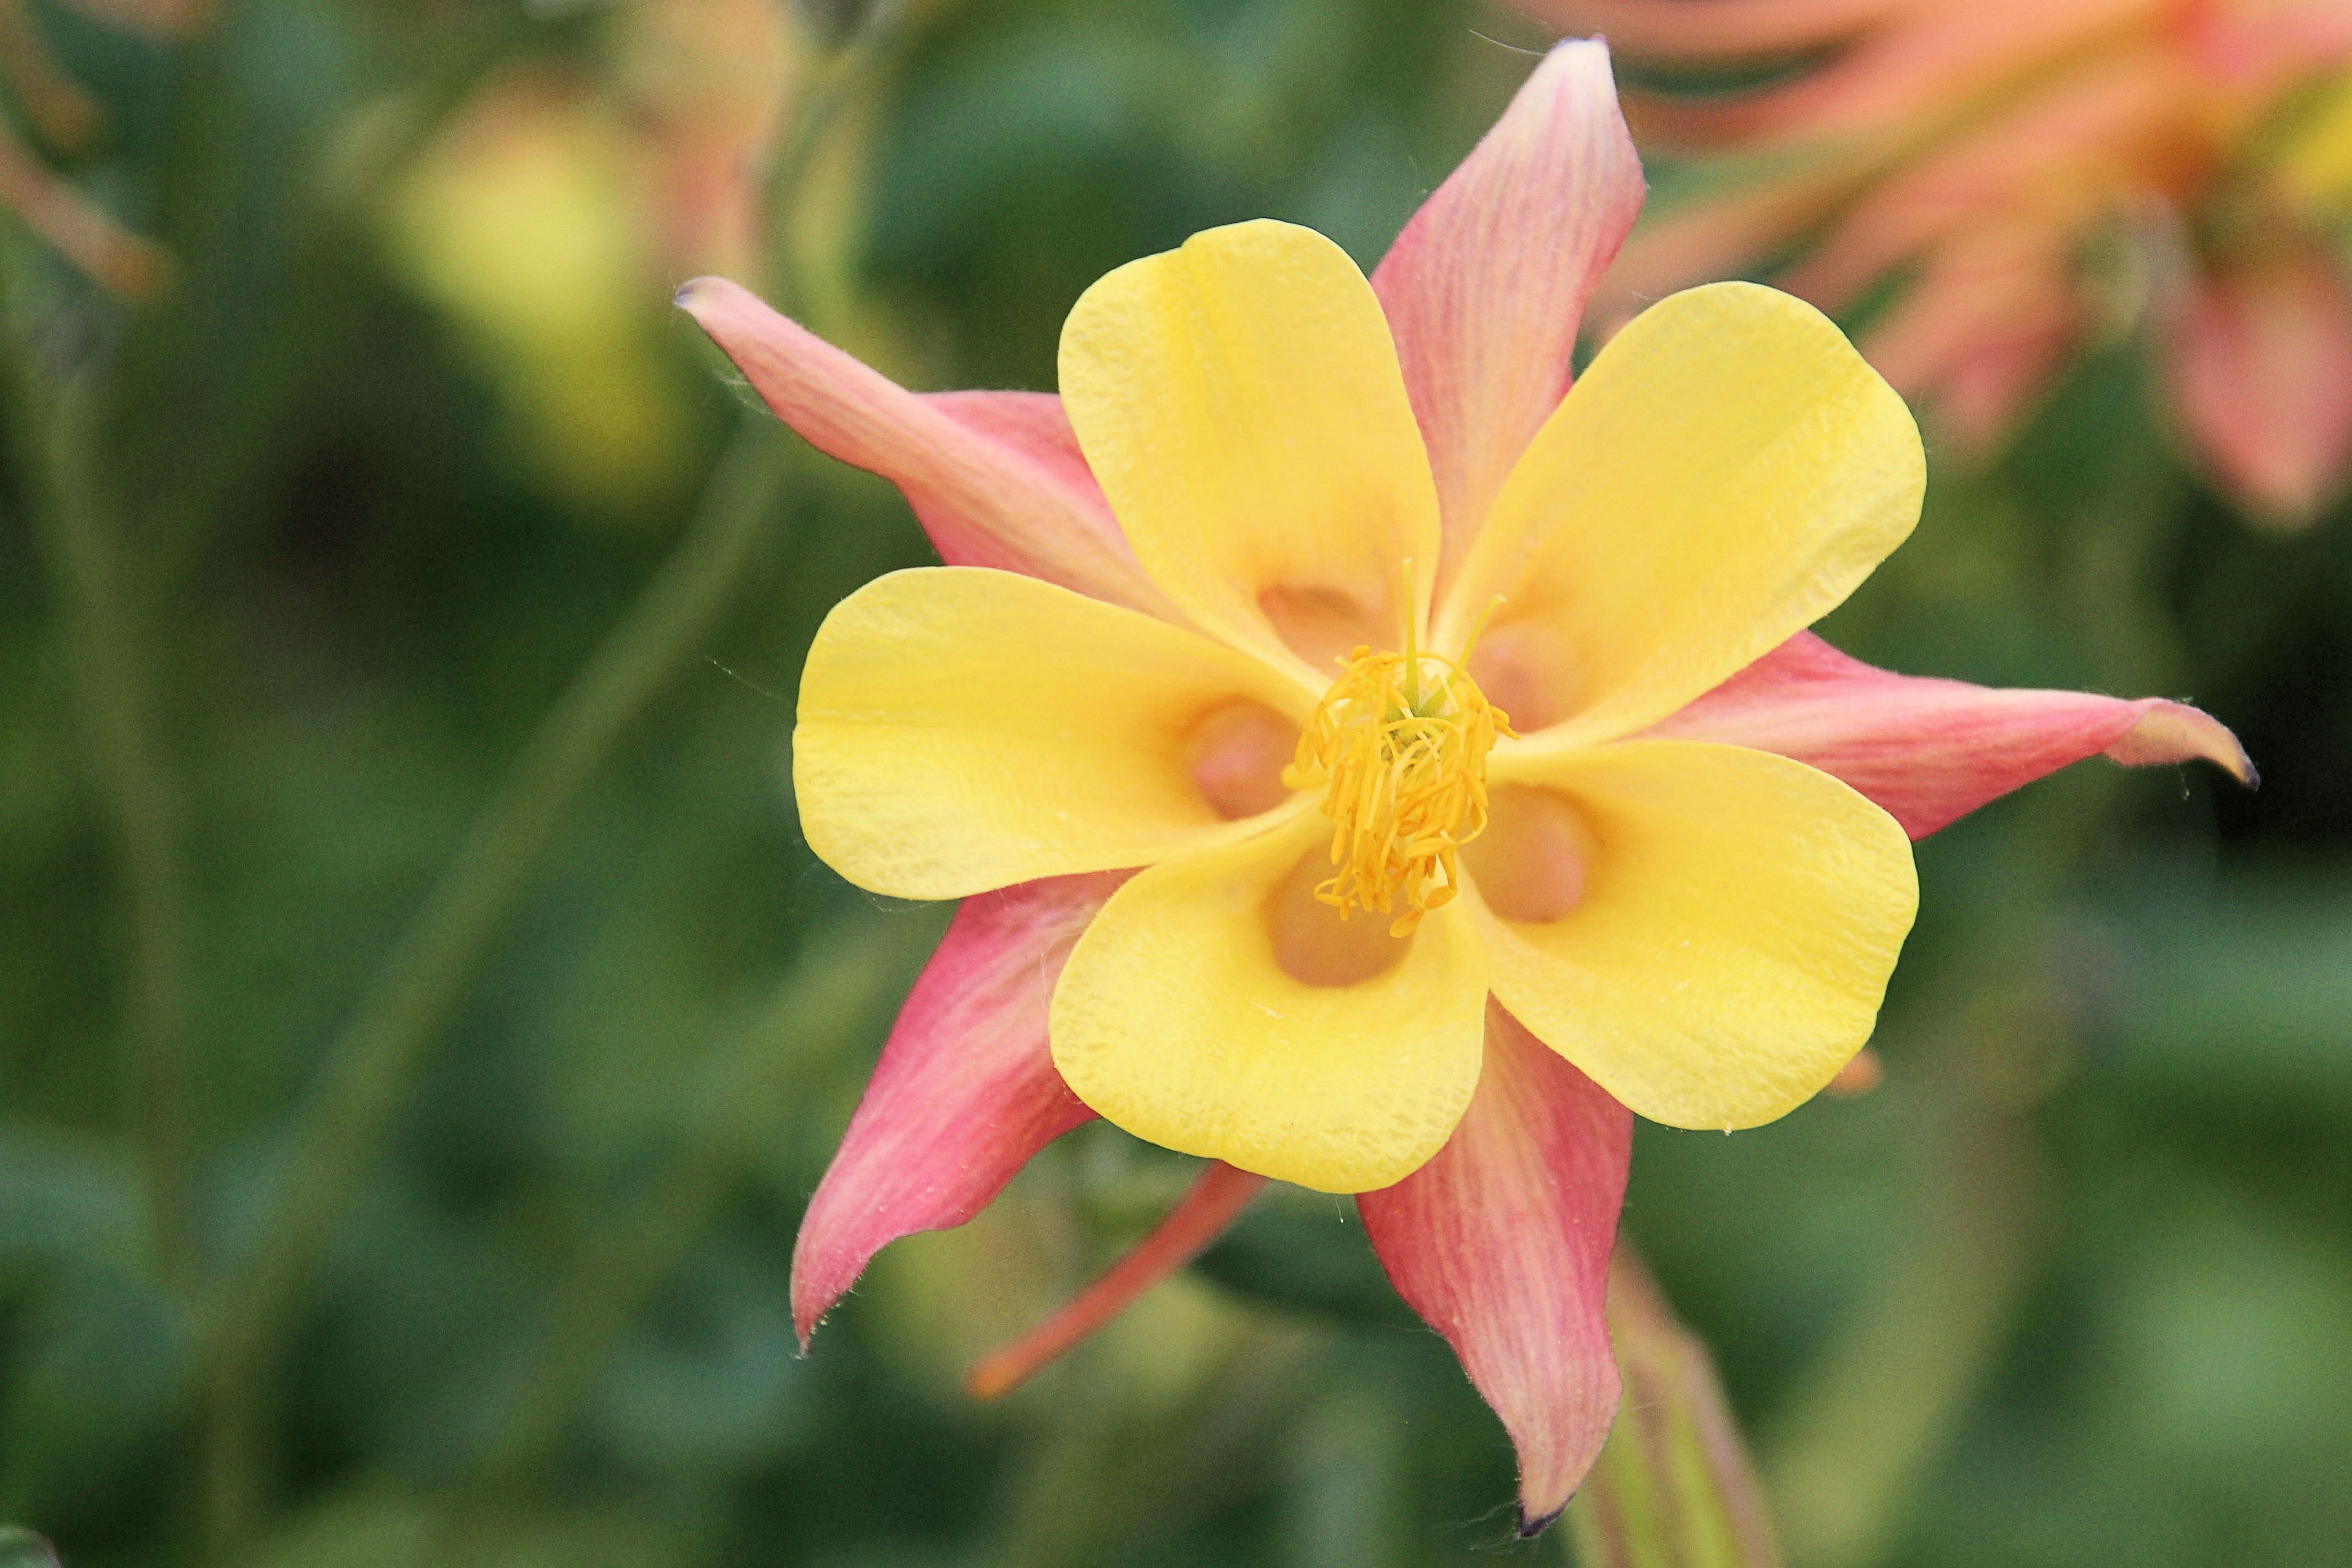 yellow and pink petaled flower